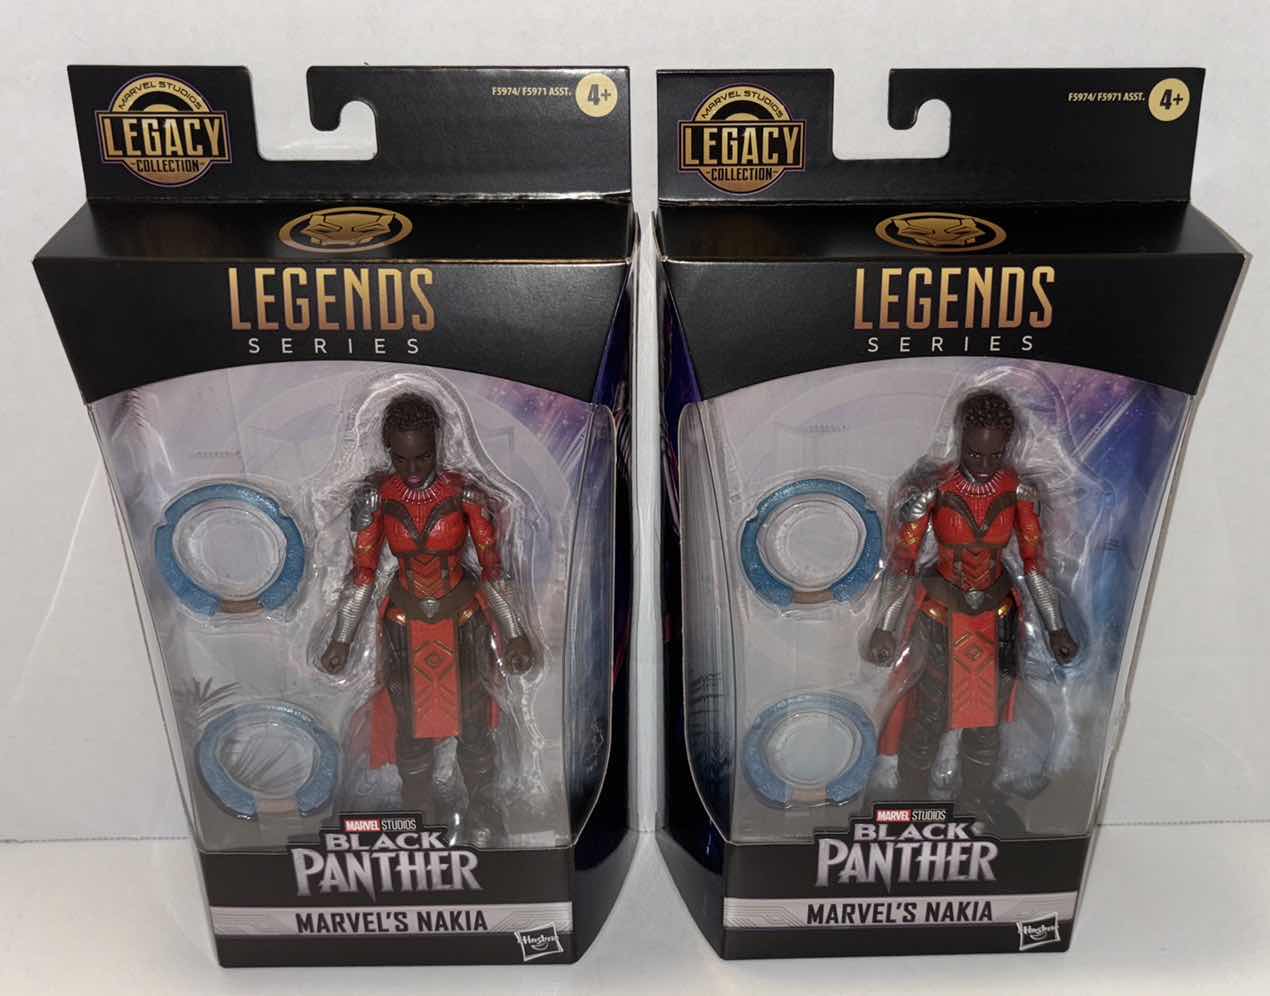 Photo 1 of NEW 2-PACK HASBRO MARVEL STUDIOS LEGACY COLLECTION LEGENDS SERIES BLACK PANTHER ACTION FIGURE & ACCESSORIES, “MARVEL’S NAKIA”